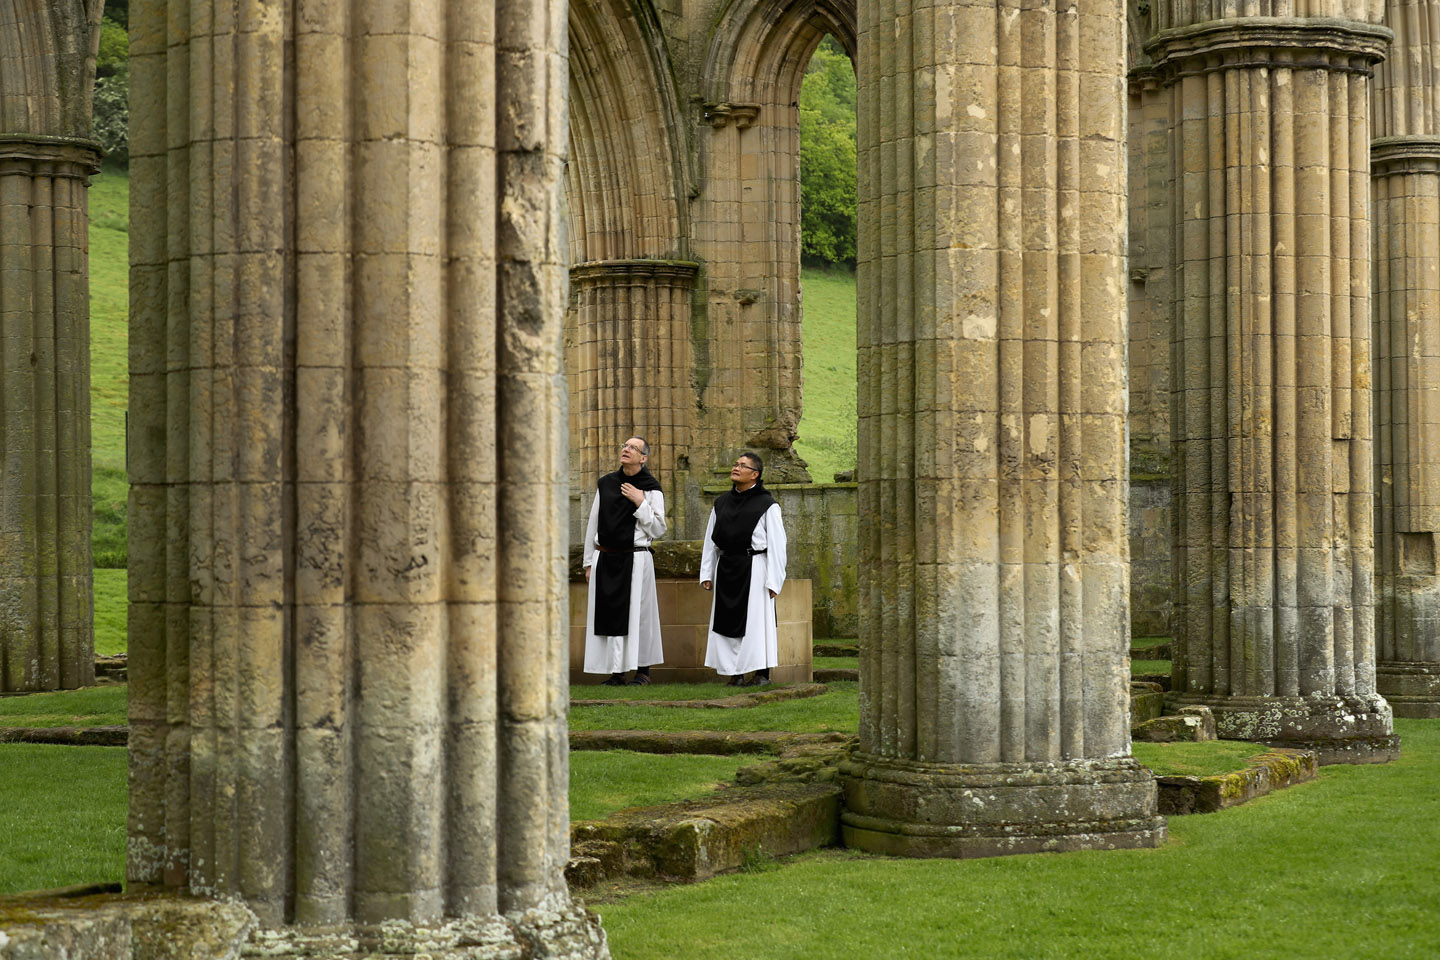 Now, about 500 years later, we can see Cistercian monks, Father Joseph and Brother Bernard, visiting the ruins of one of these great abbeys: the Abbey of Rievaulx.